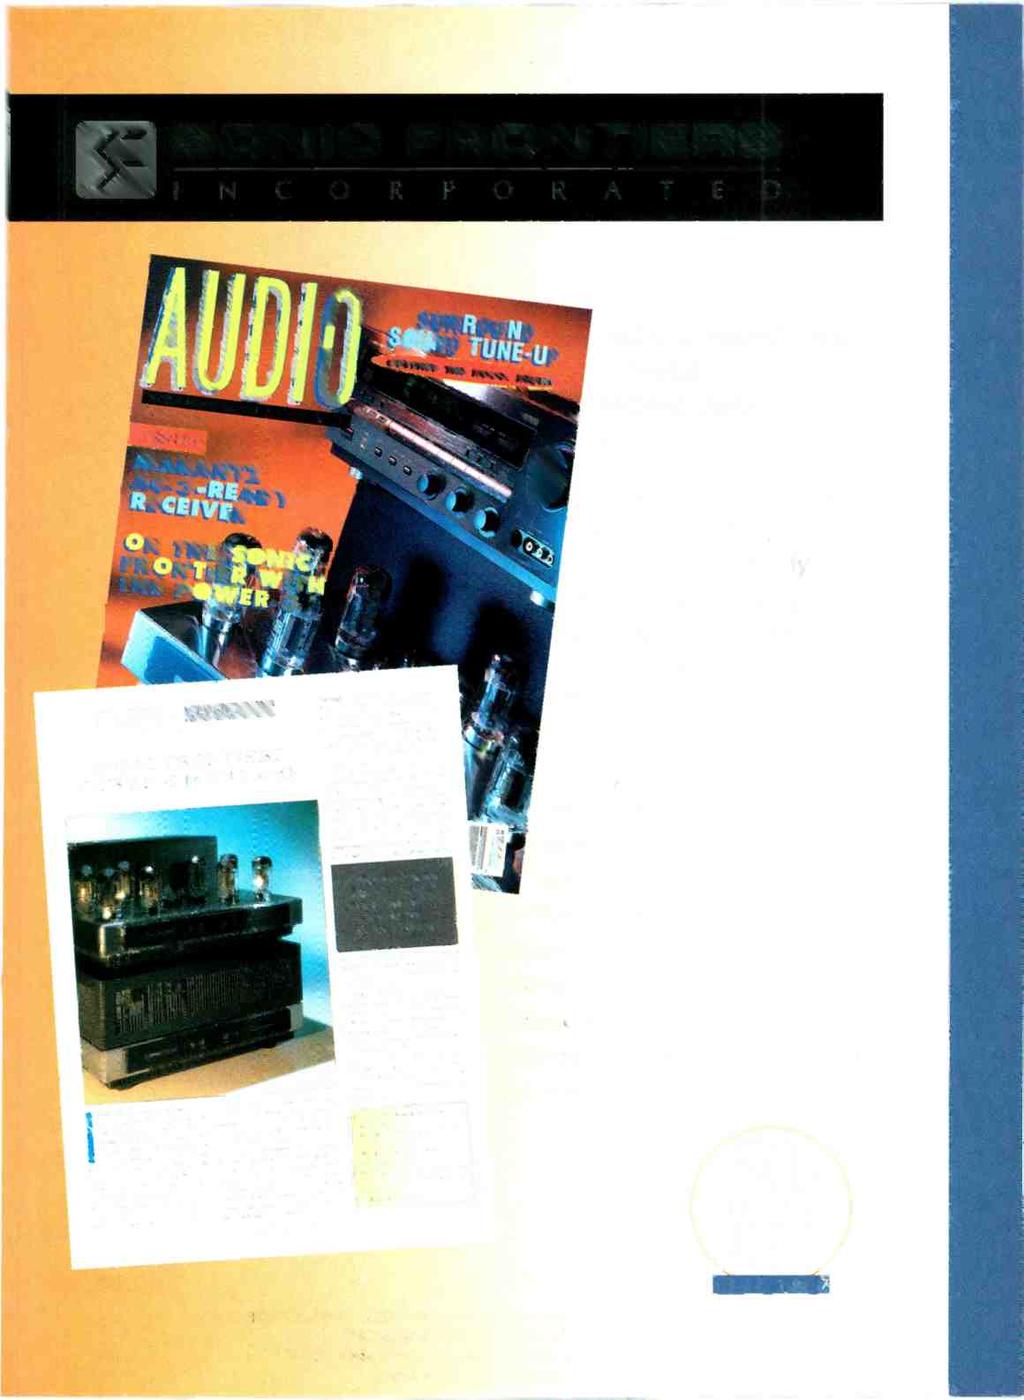 , > I -. ADVERTISEMENT SONIC FRONTIERS INCOR POR A TED THE EQUIP/NEW' AUTHORITY SONIC FRONTIERS POWER -3 MONO AMP AUGUST 1996 PROFILE SONIC HI.ON'l'I ENS 1'(ONV F,1',-3 MONO :k(111' rn.y.-rja.